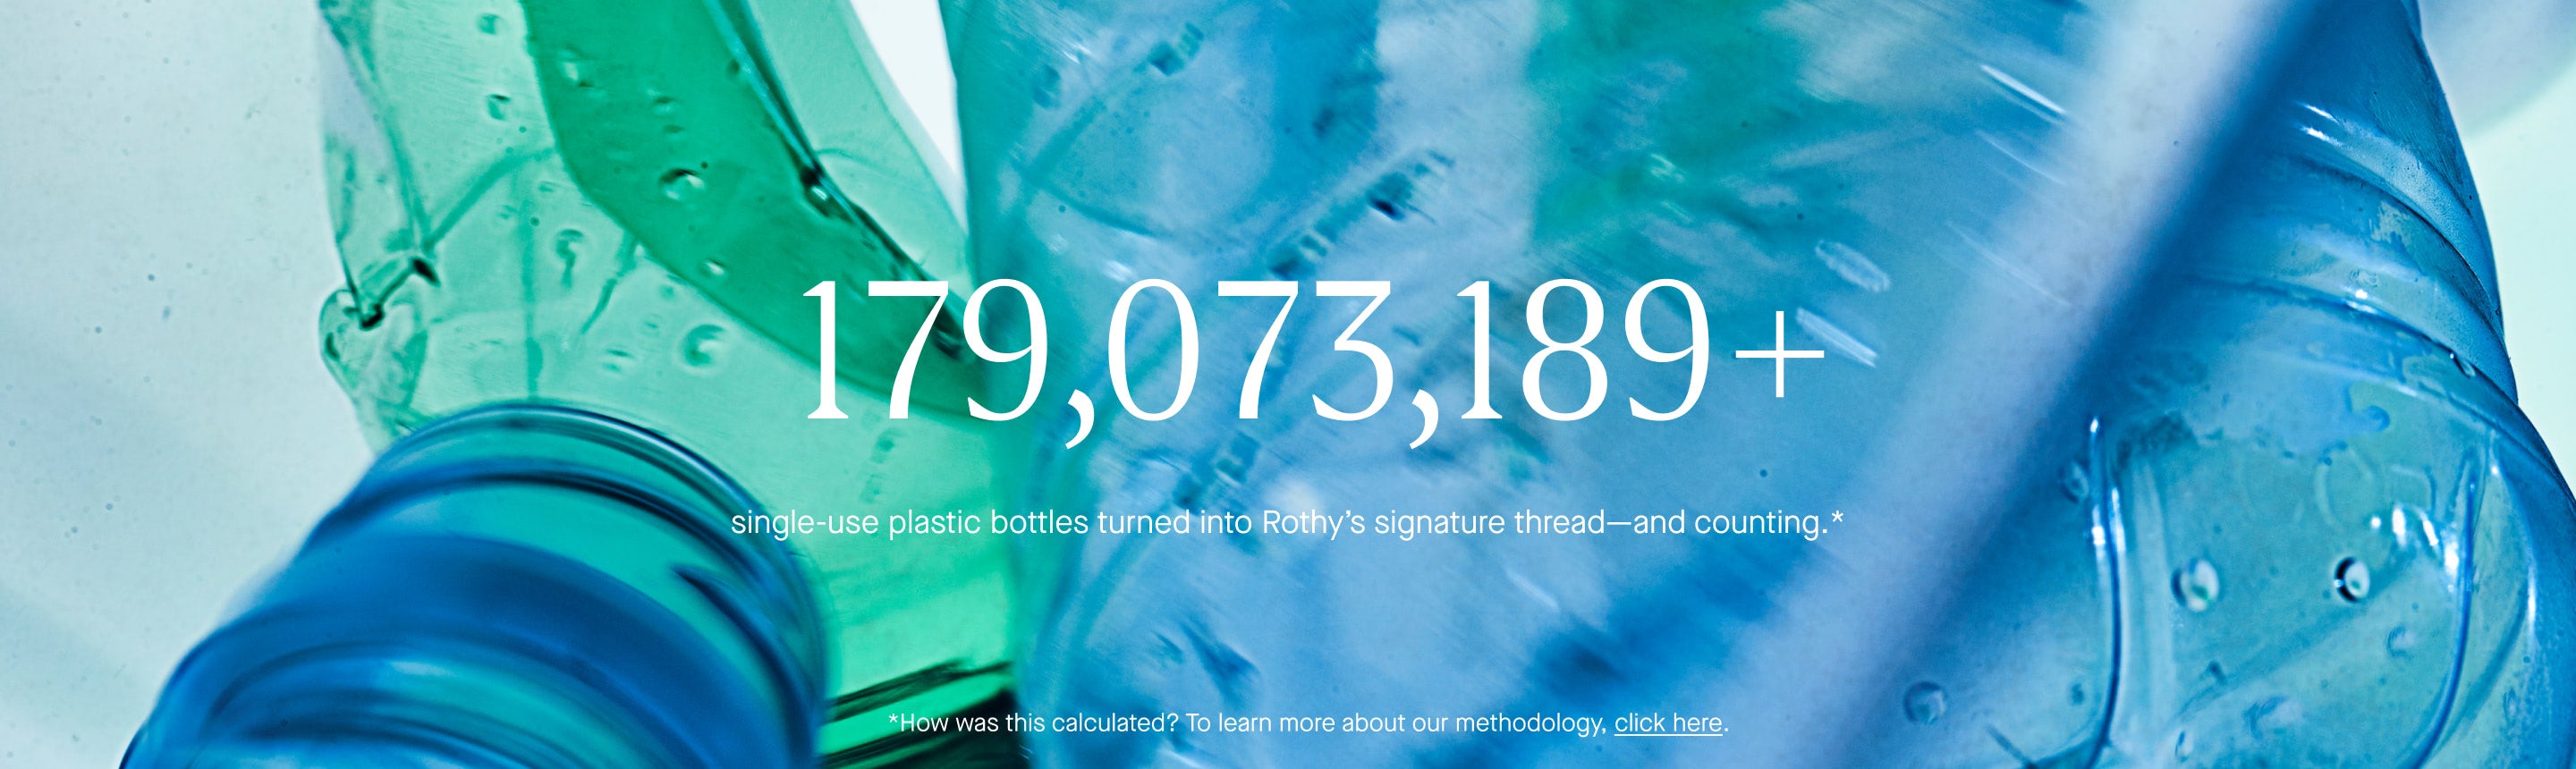 179,073,189+ single-use plastic bottles turned into Rothy's signature thread-and counting.*